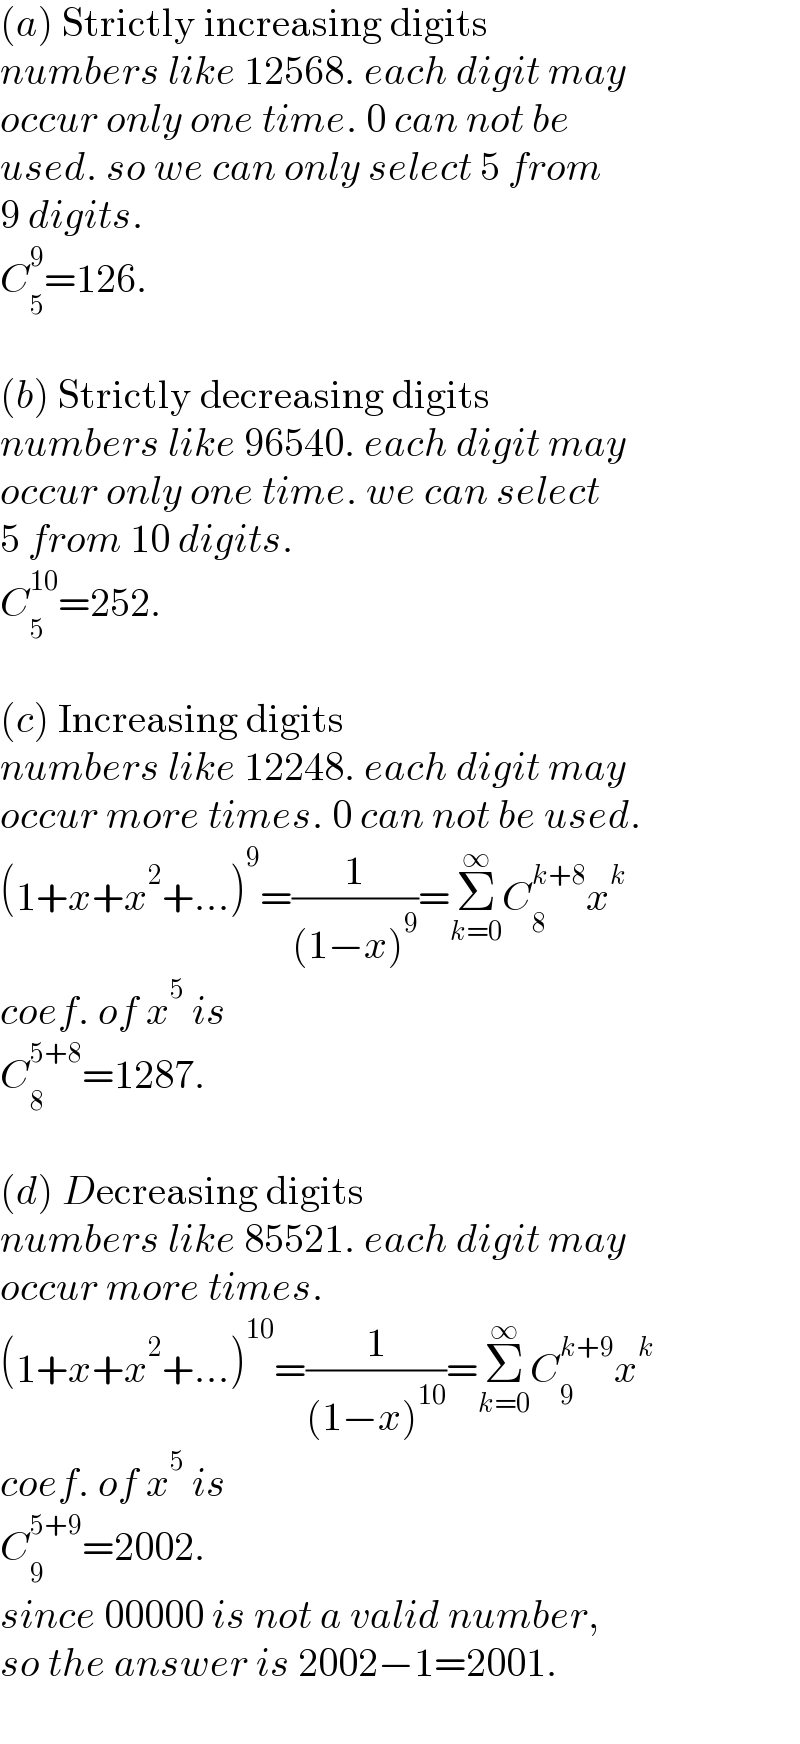 (a) Strictly increasing digits  numbers like 12568. each digit may  occur only one time. 0 can not be  used. so we can only select 5 from  9 digits.  C_5 ^9 =126.    (b) Strictly decreasing digits  numbers like 96540. each digit may  occur only one time. we can select   5 from 10 digits.  C_5 ^(10) =252.    (c) Increasing digits  numbers like 12248. each digit may  occur more times. 0 can not be used.  (1+x+x^2 +...)^9 =(1/((1−x)^9 ))=Σ_(k=0) ^∞ C_8 ^(k+8) x^k   coef. of x^5  is  C_8 ^(5+8) =1287.    (d) Decreasing digits  numbers like 85521. each digit may  occur more times.  (1+x+x^2 +...)^(10) =(1/((1−x)^(10) ))=Σ_(k=0) ^∞ C_9 ^(k+9) x^k   coef. of x^5  is  C_9 ^(5+9) =2002.  since 00000 is not a valid number,  so the answer is 2002−1=2001.  